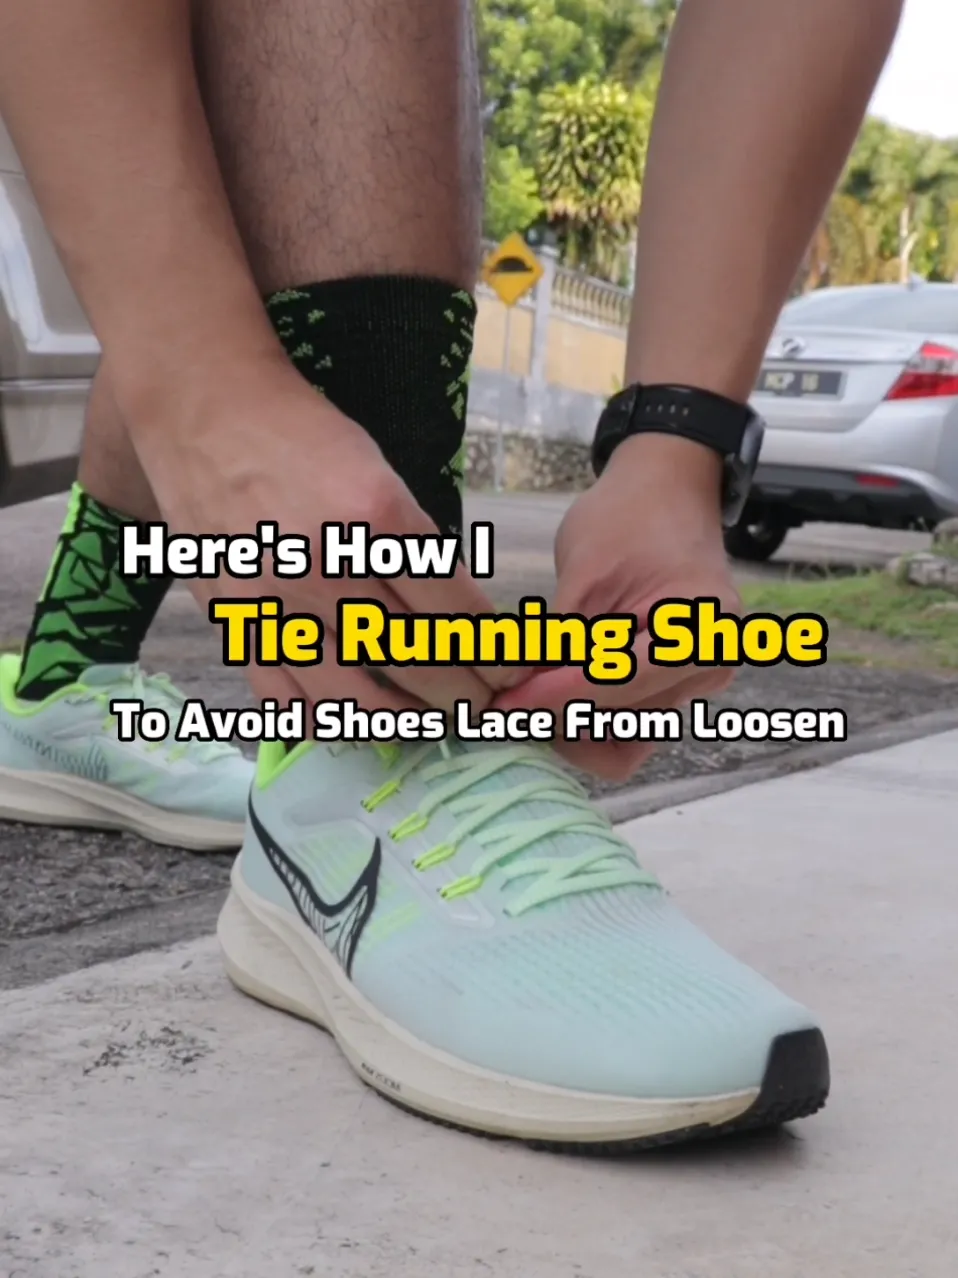 How to Lace & Tie Running Shoes